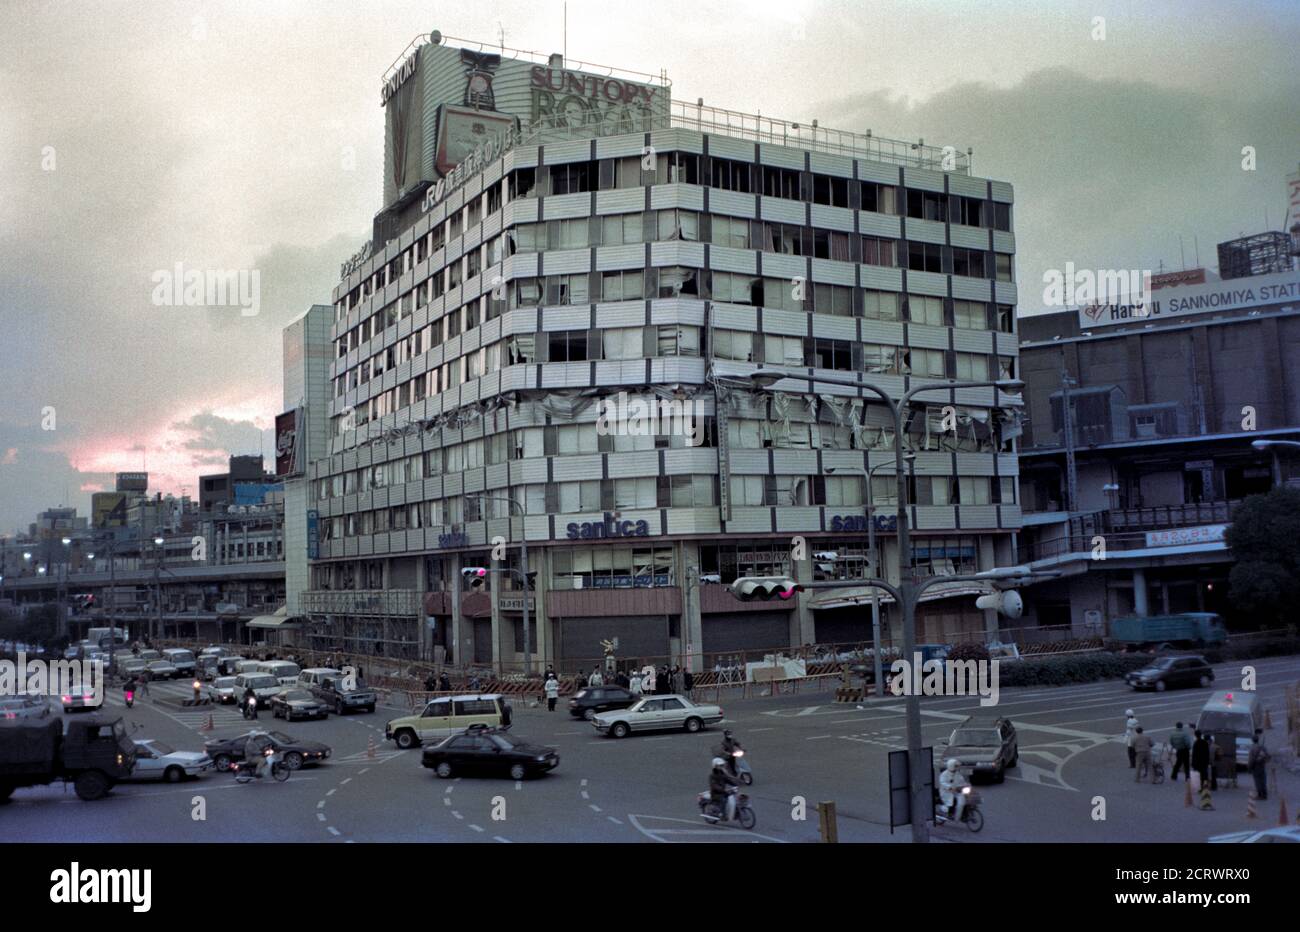 Department store building next to Hankyu Sannomiya Station collapsed in the middle from the damage caused by the 1995 Great Hanshin Earthquake in Kobe, Japan Stock Photo